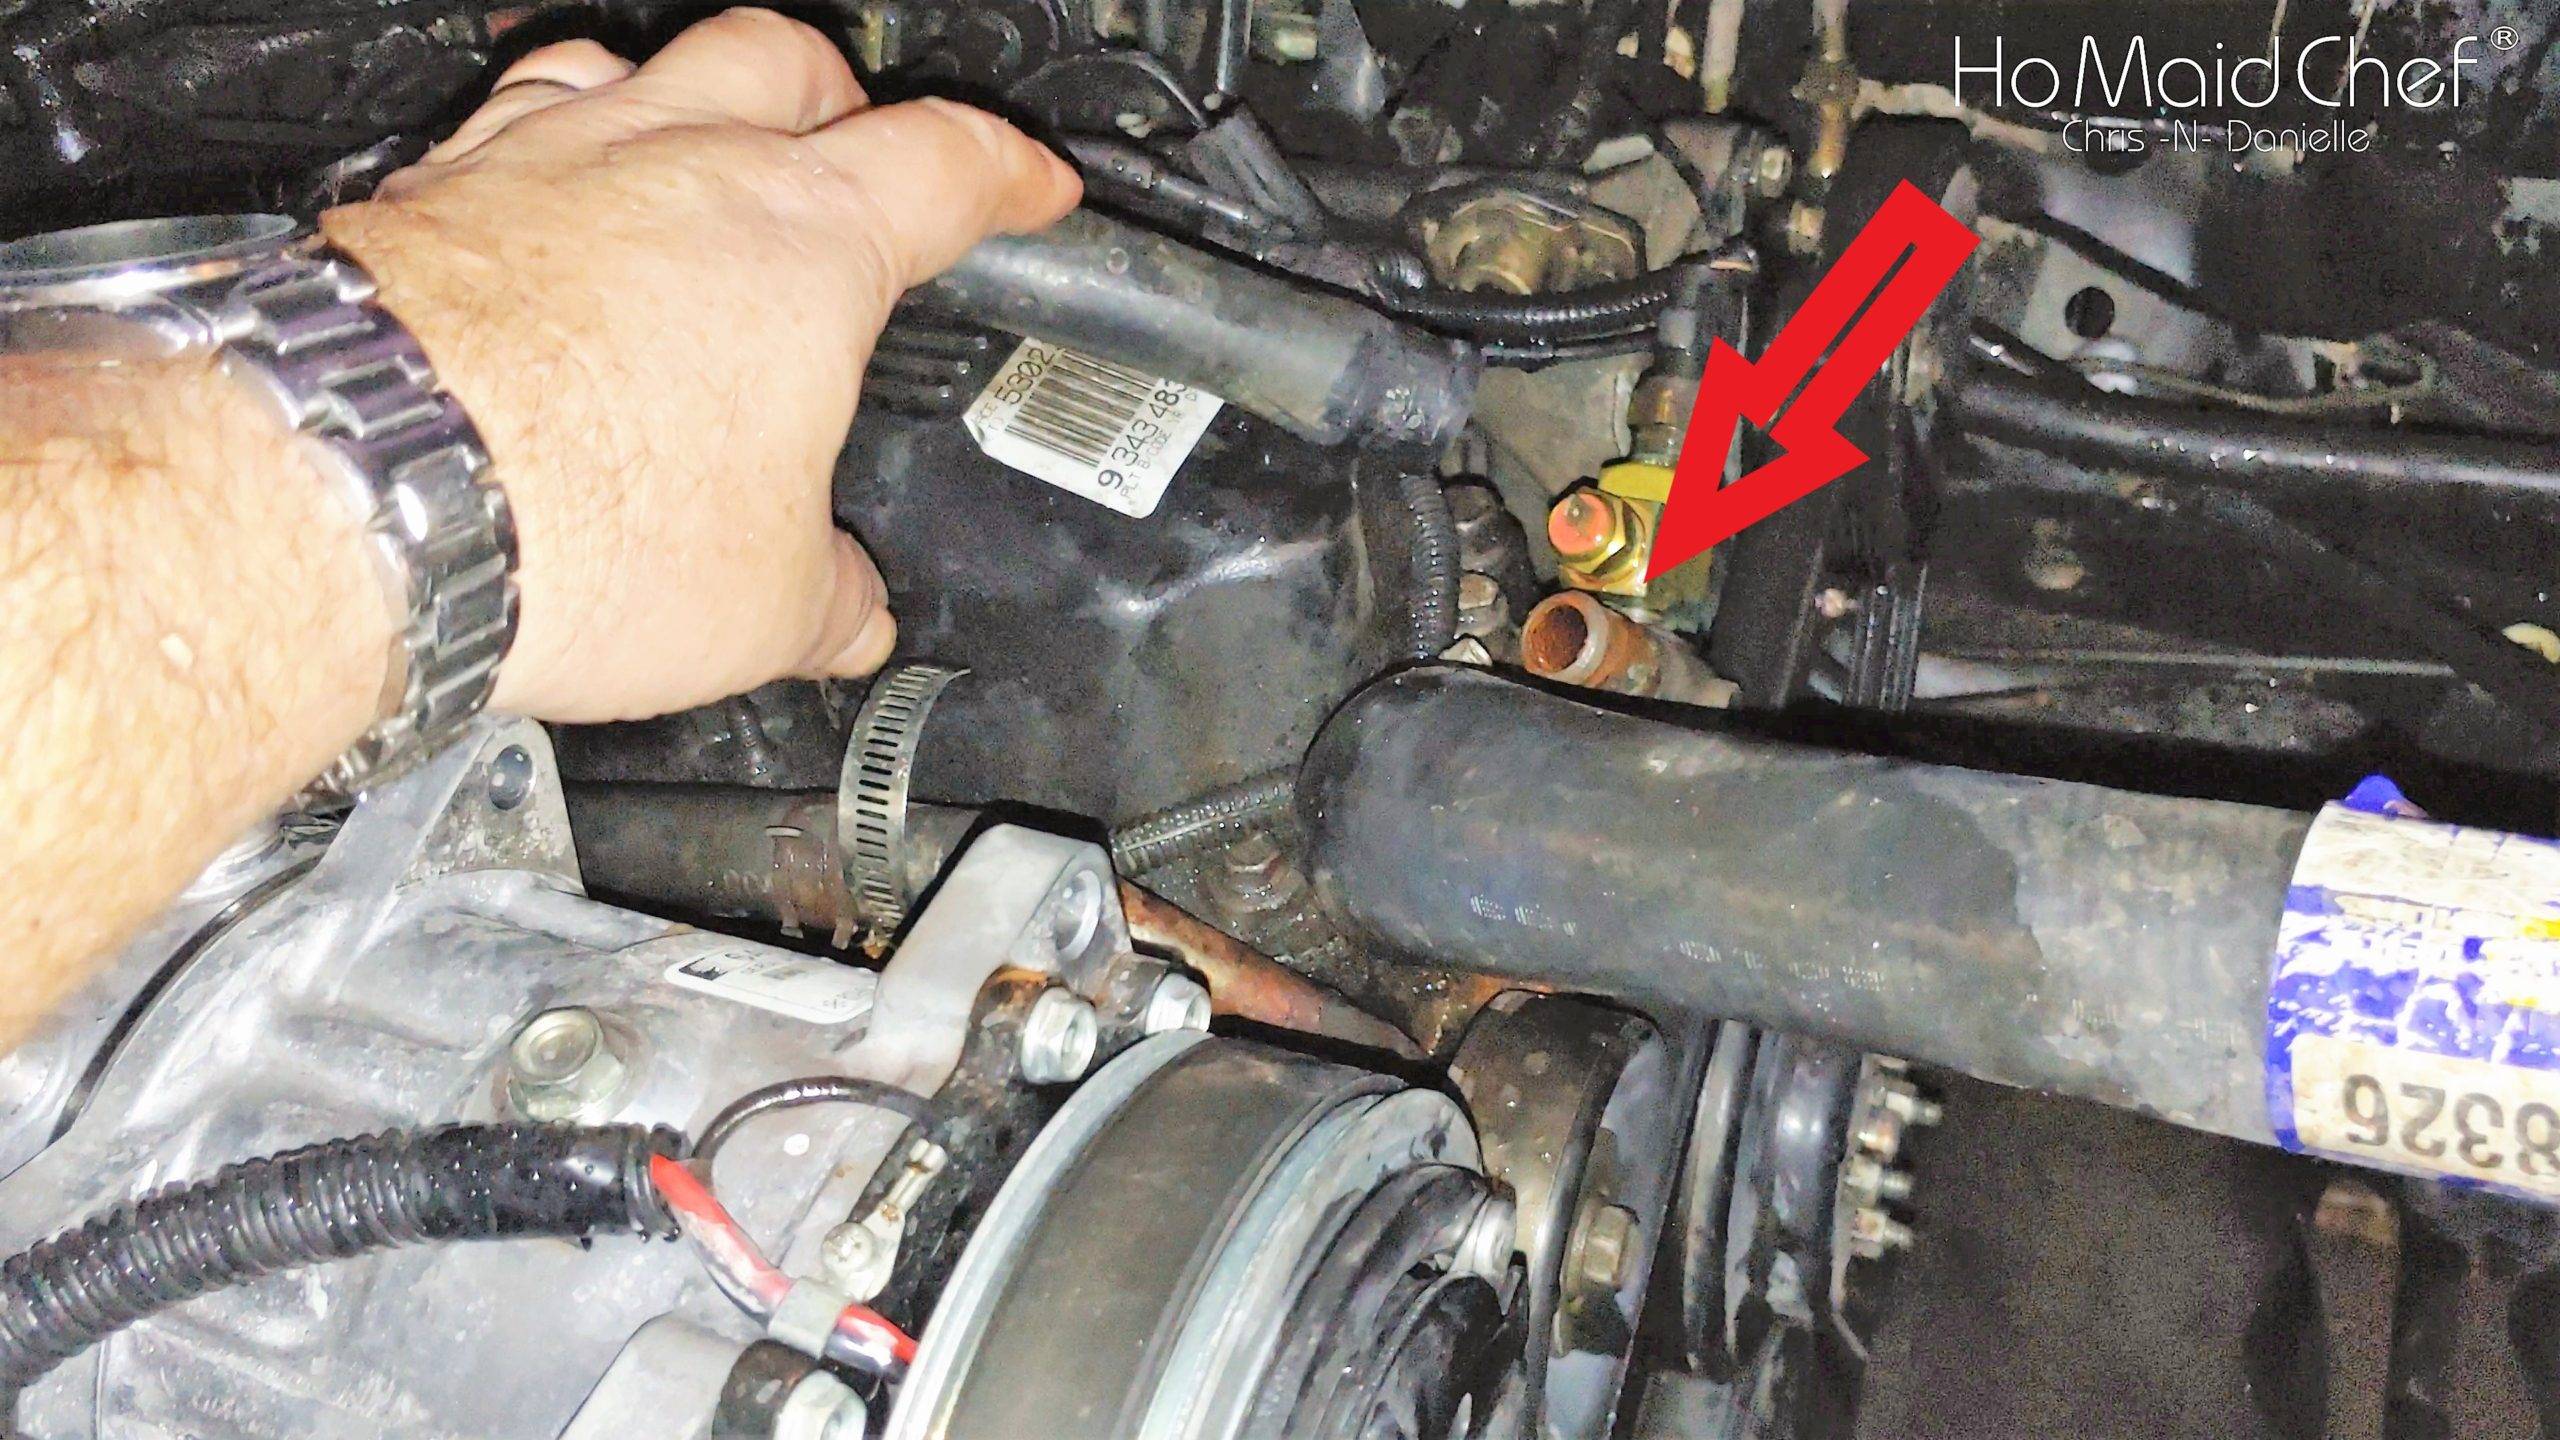 How To Avoid Vapor Lock With Engine Flush Process - Chris Does What